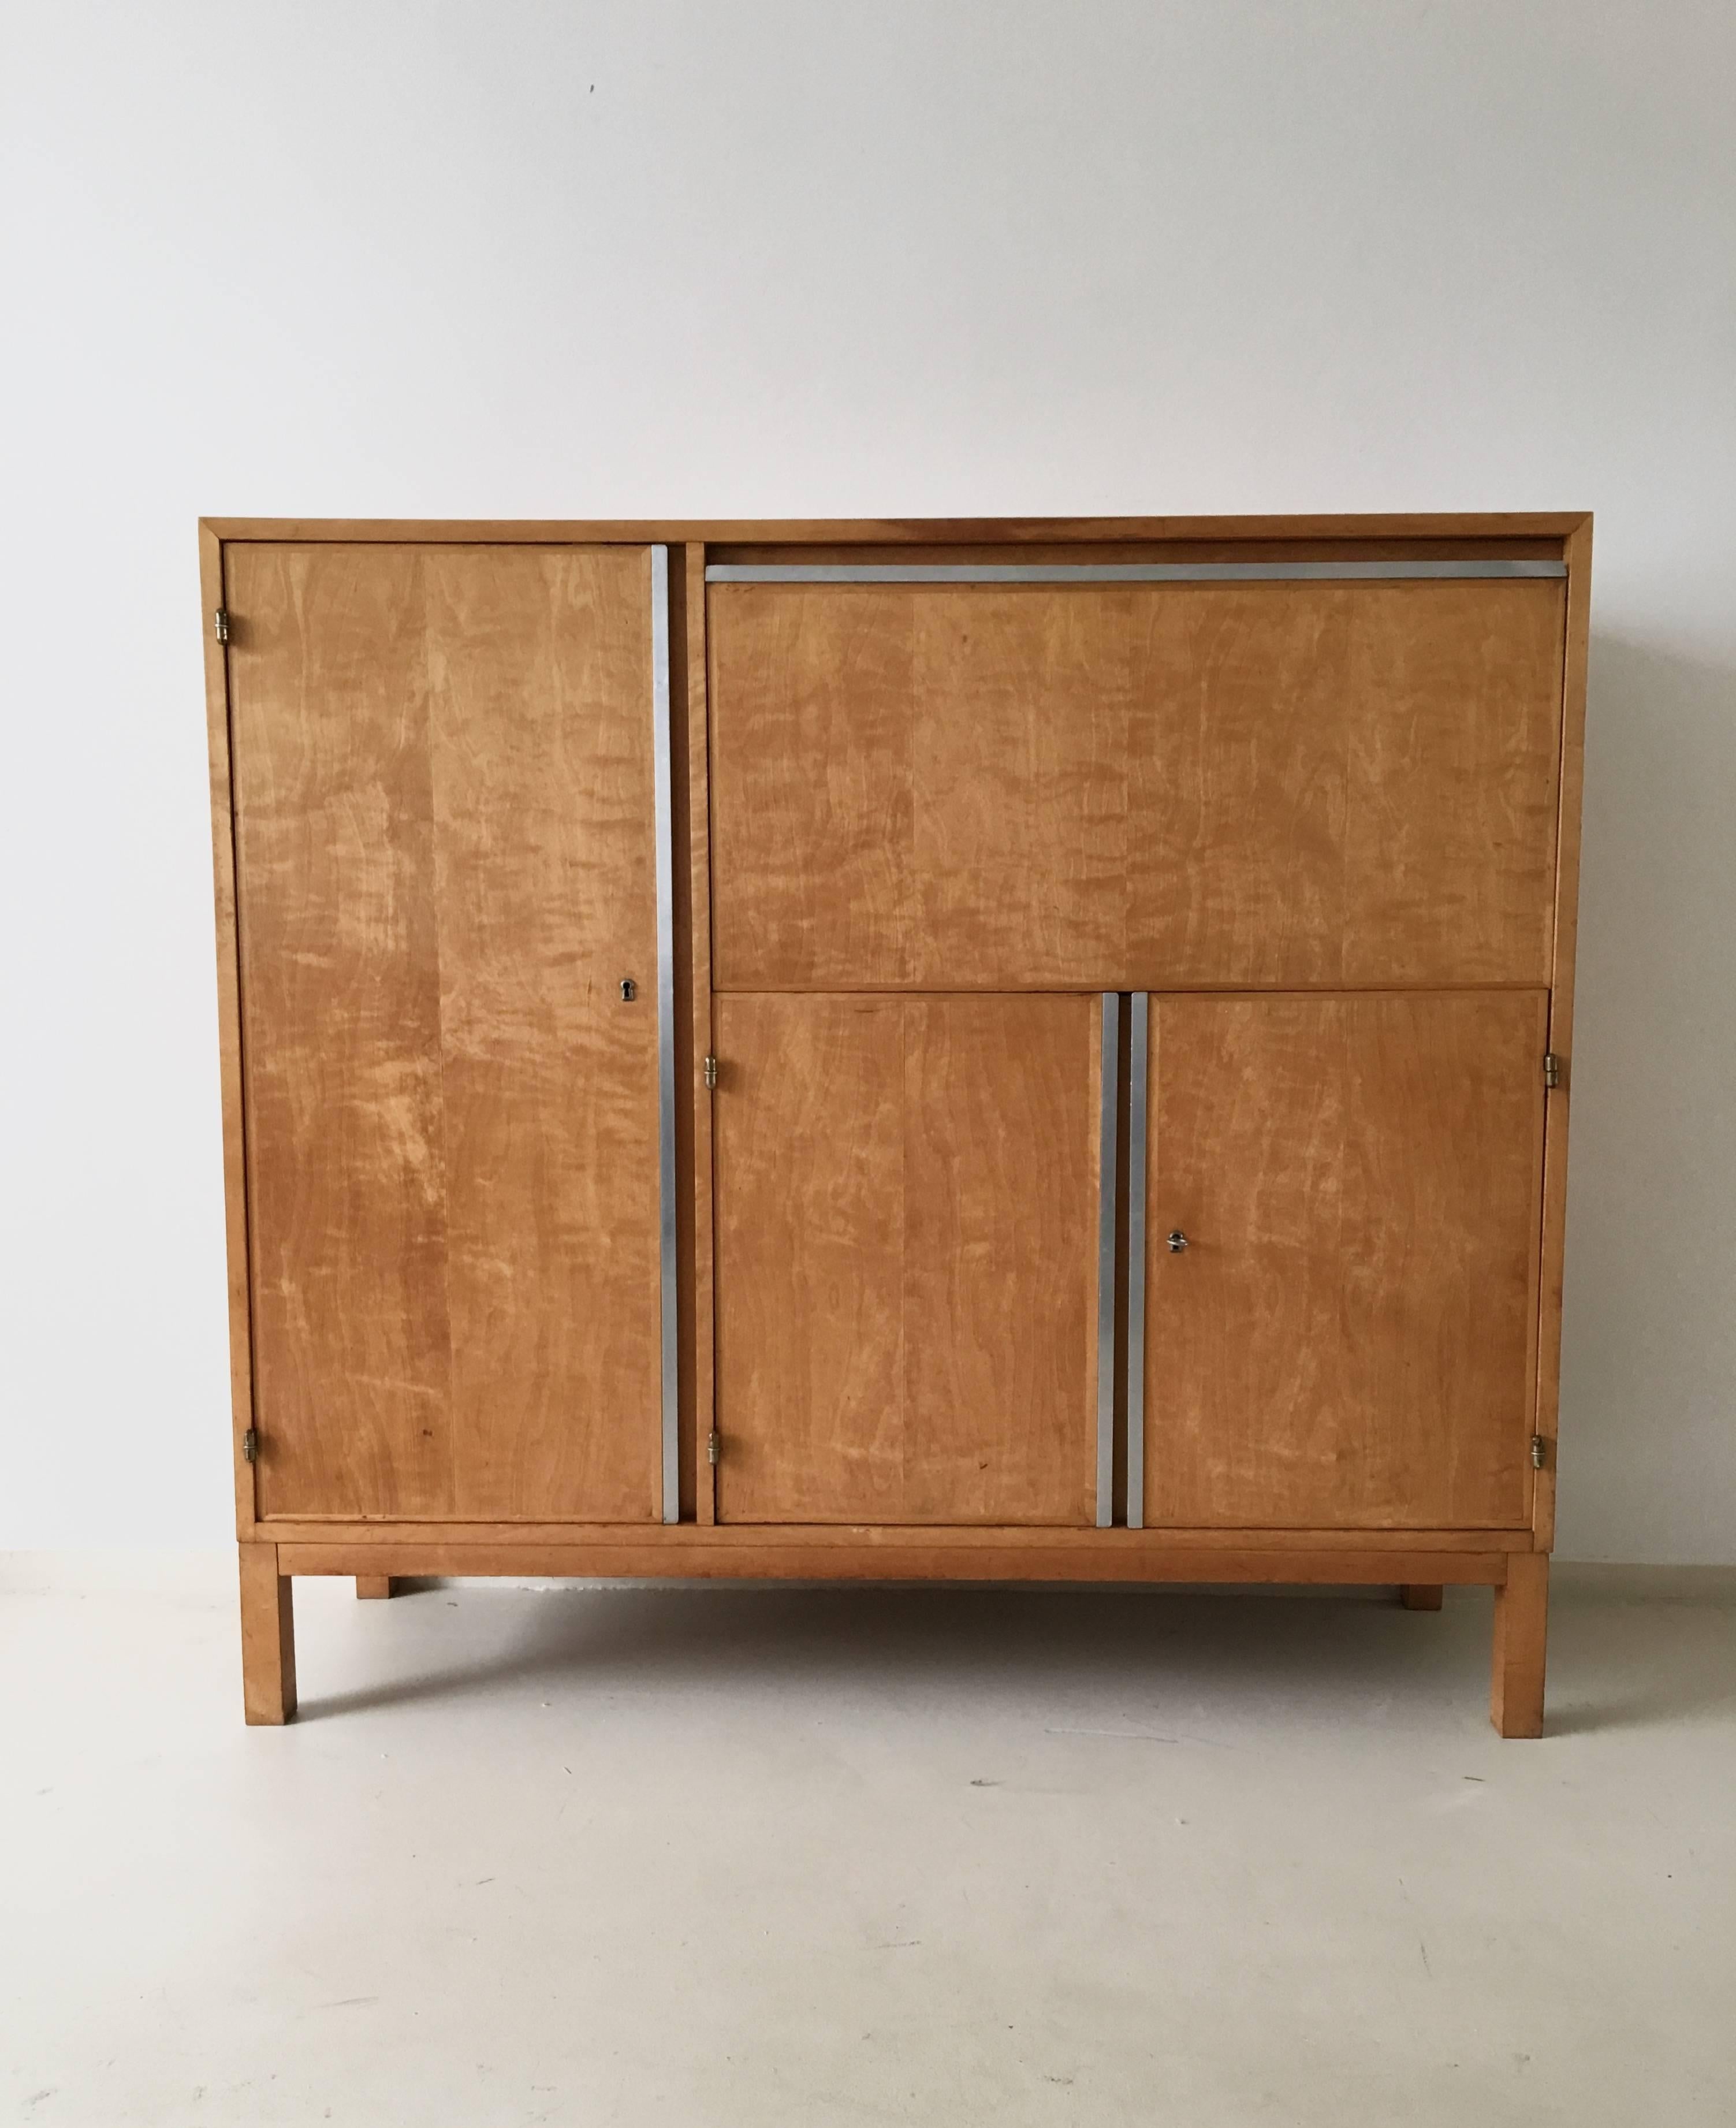 This Dutch Mid-Century cabinet or cupboard originates from the 1950s and was attributed to Cees Braakman for UMS Pastoe. It is made from birch veneer and features shelving space as well as three drawers inside. Some have the typical white lacquered